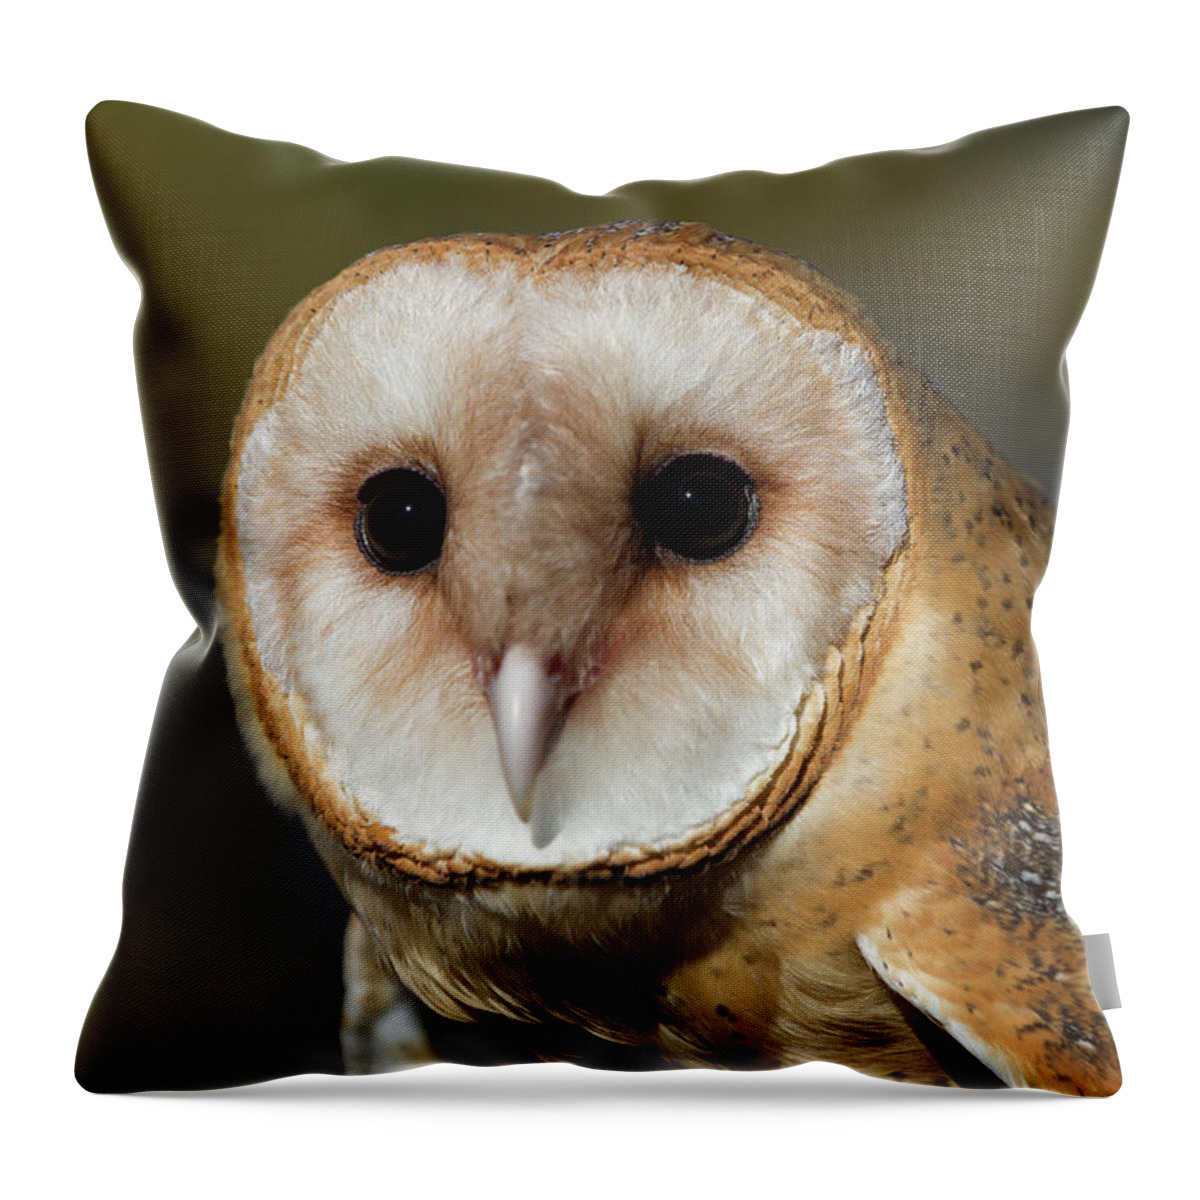 Owls Throw Pillow featuring the photograph Barn Owl 4 by Chris Scroggins